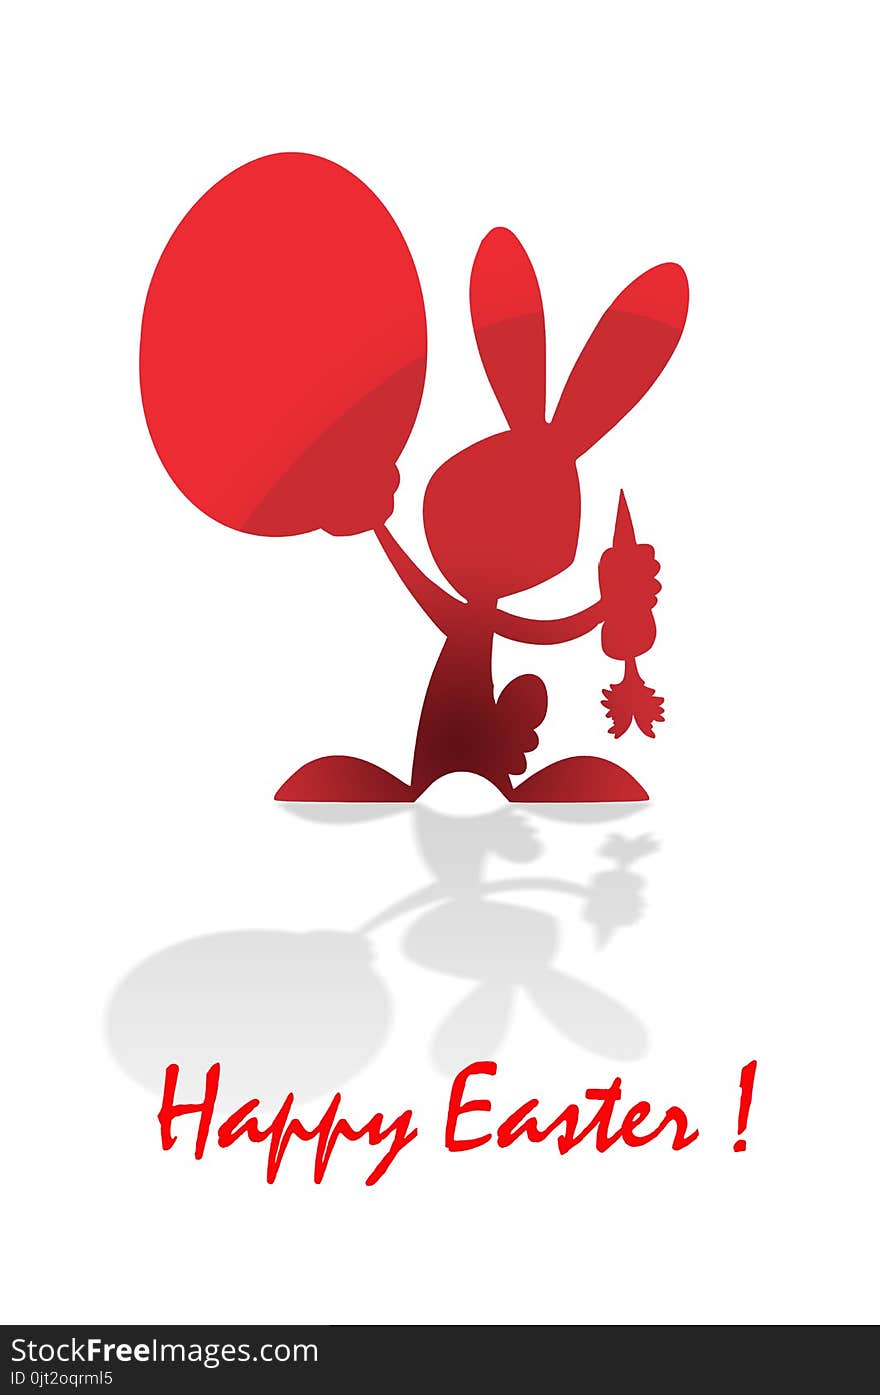 Easter card with easter bunny easter red egg and greeting Happy easter, also available as a Vector, Eps file. The vector version be scaled to any size without loss of quality. Easter card with easter bunny easter red egg and greeting Happy easter, also available as a Vector, Eps file. The vector version be scaled to any size without loss of quality.